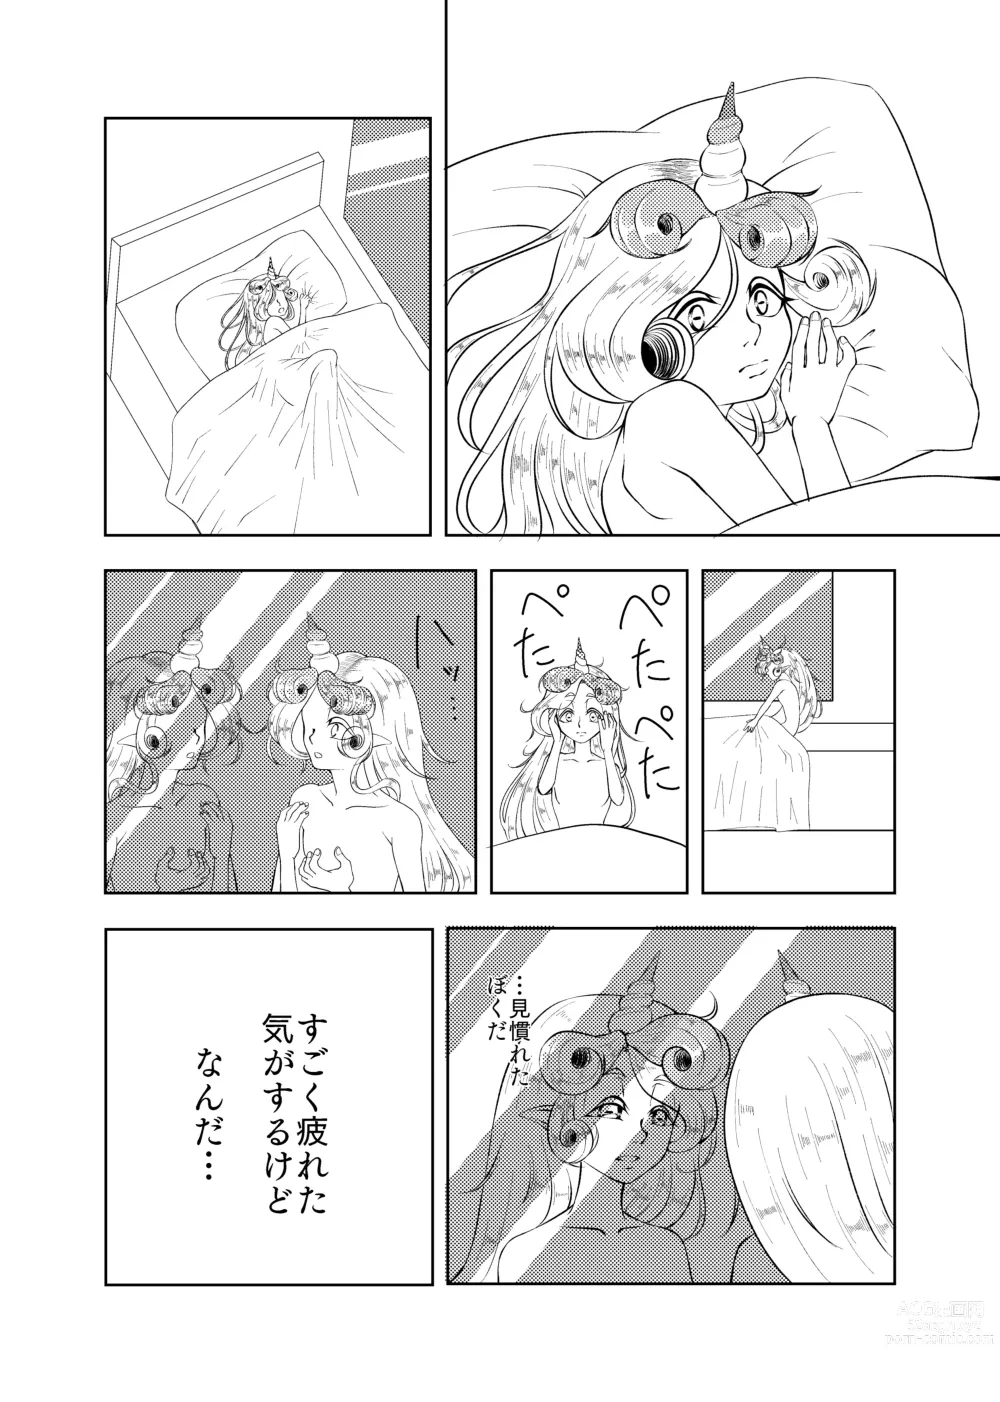 Page 18 of doujinshi Butterfly nebula ｰmirror houseｰ